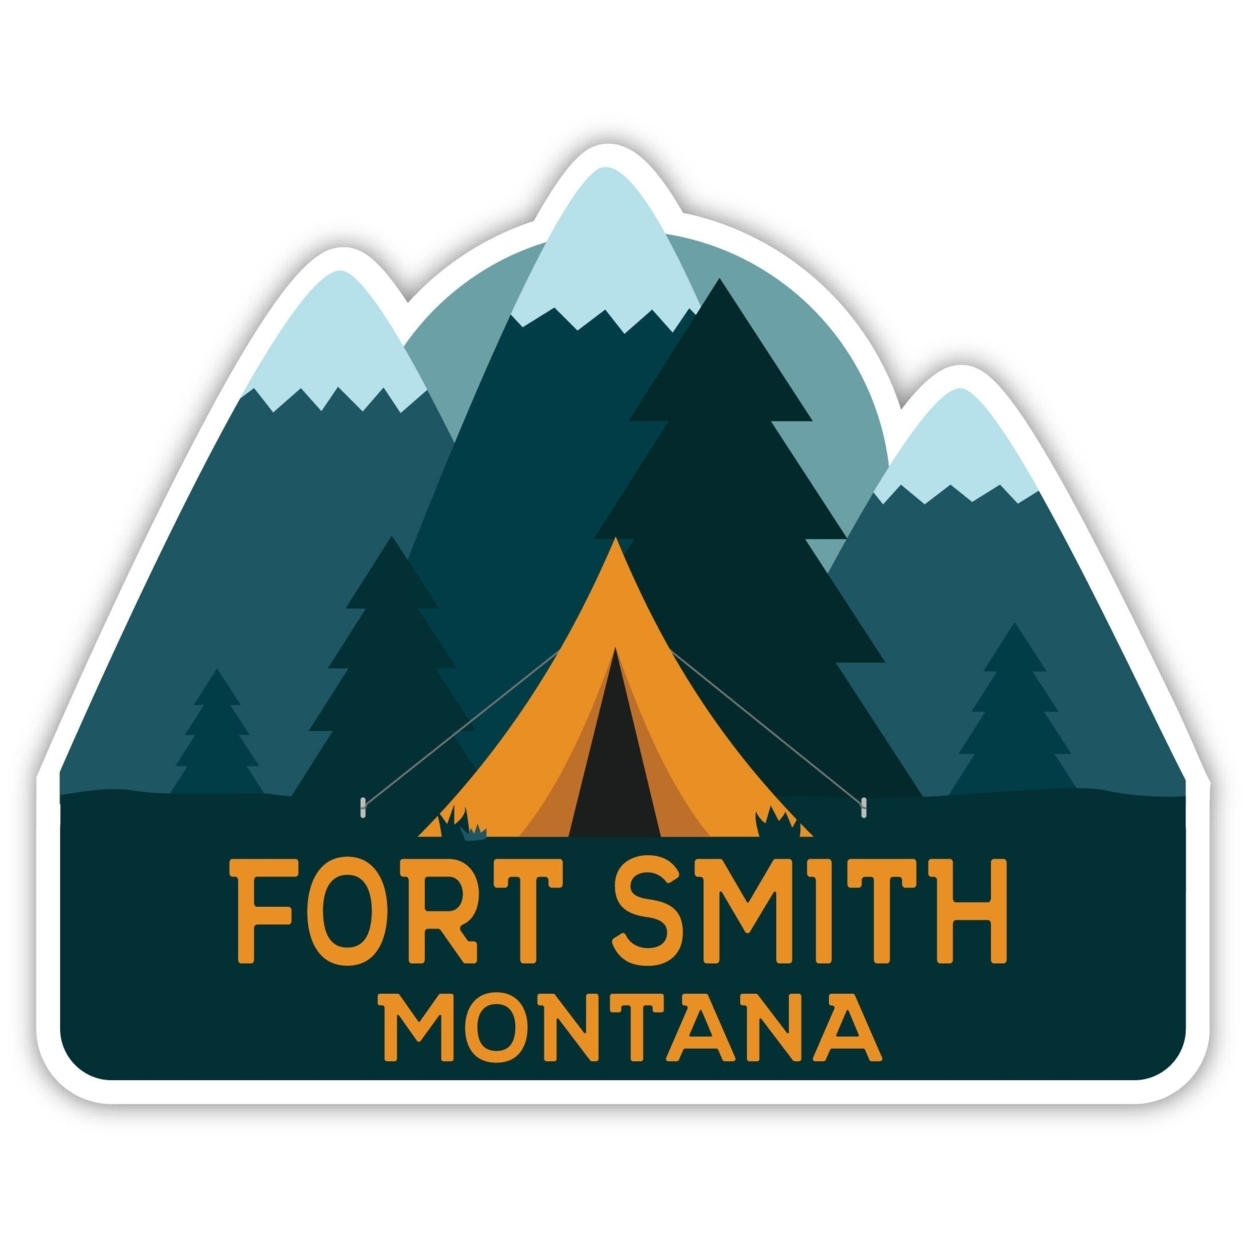 Fort Smith Montana Souvenir Decorative Stickers (Choose Theme And Size) - Single Unit, 10-Inch, Tent